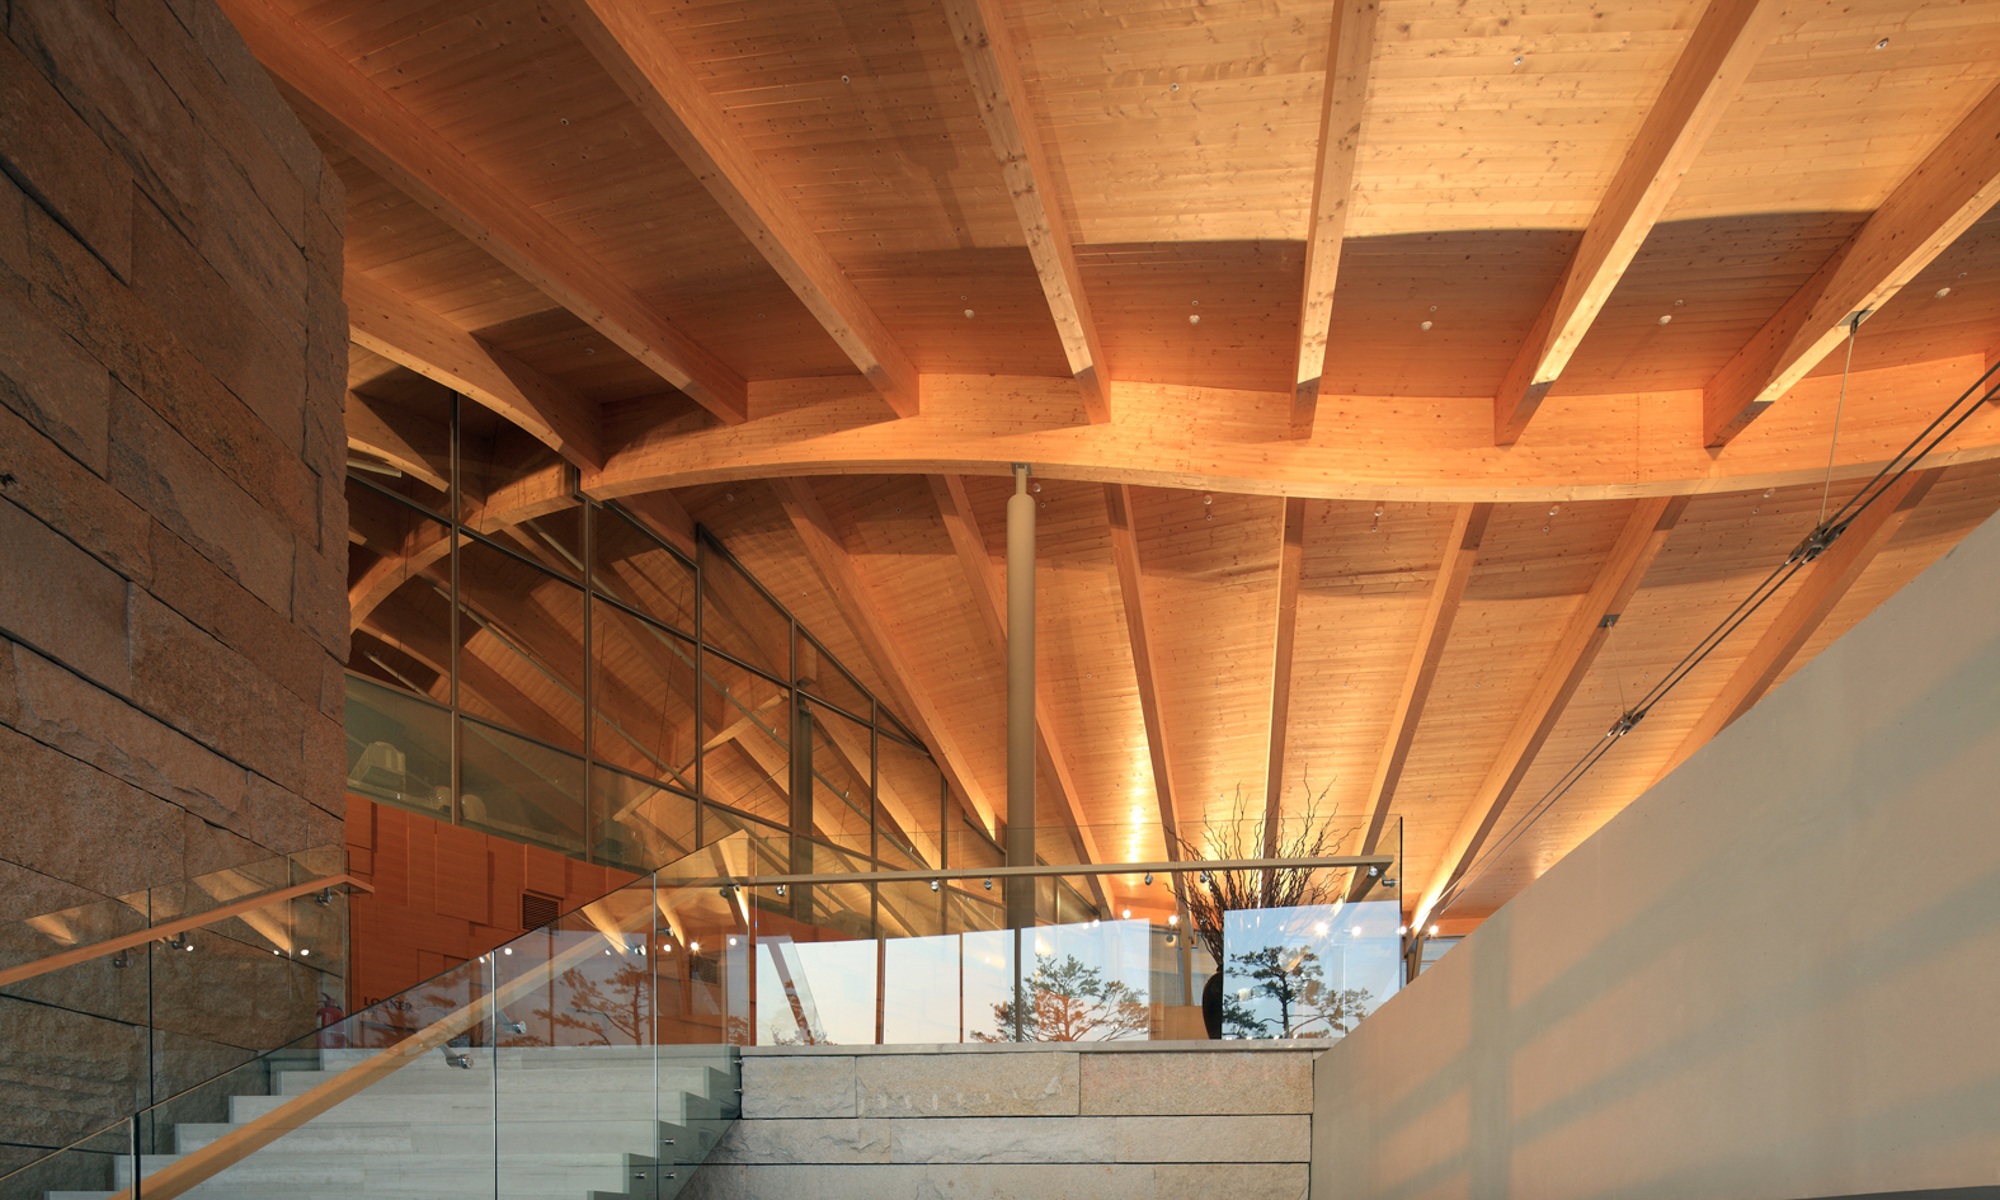 Internal photograph of the staircase and ceiling structure of the Hillmaru golf clubhouse